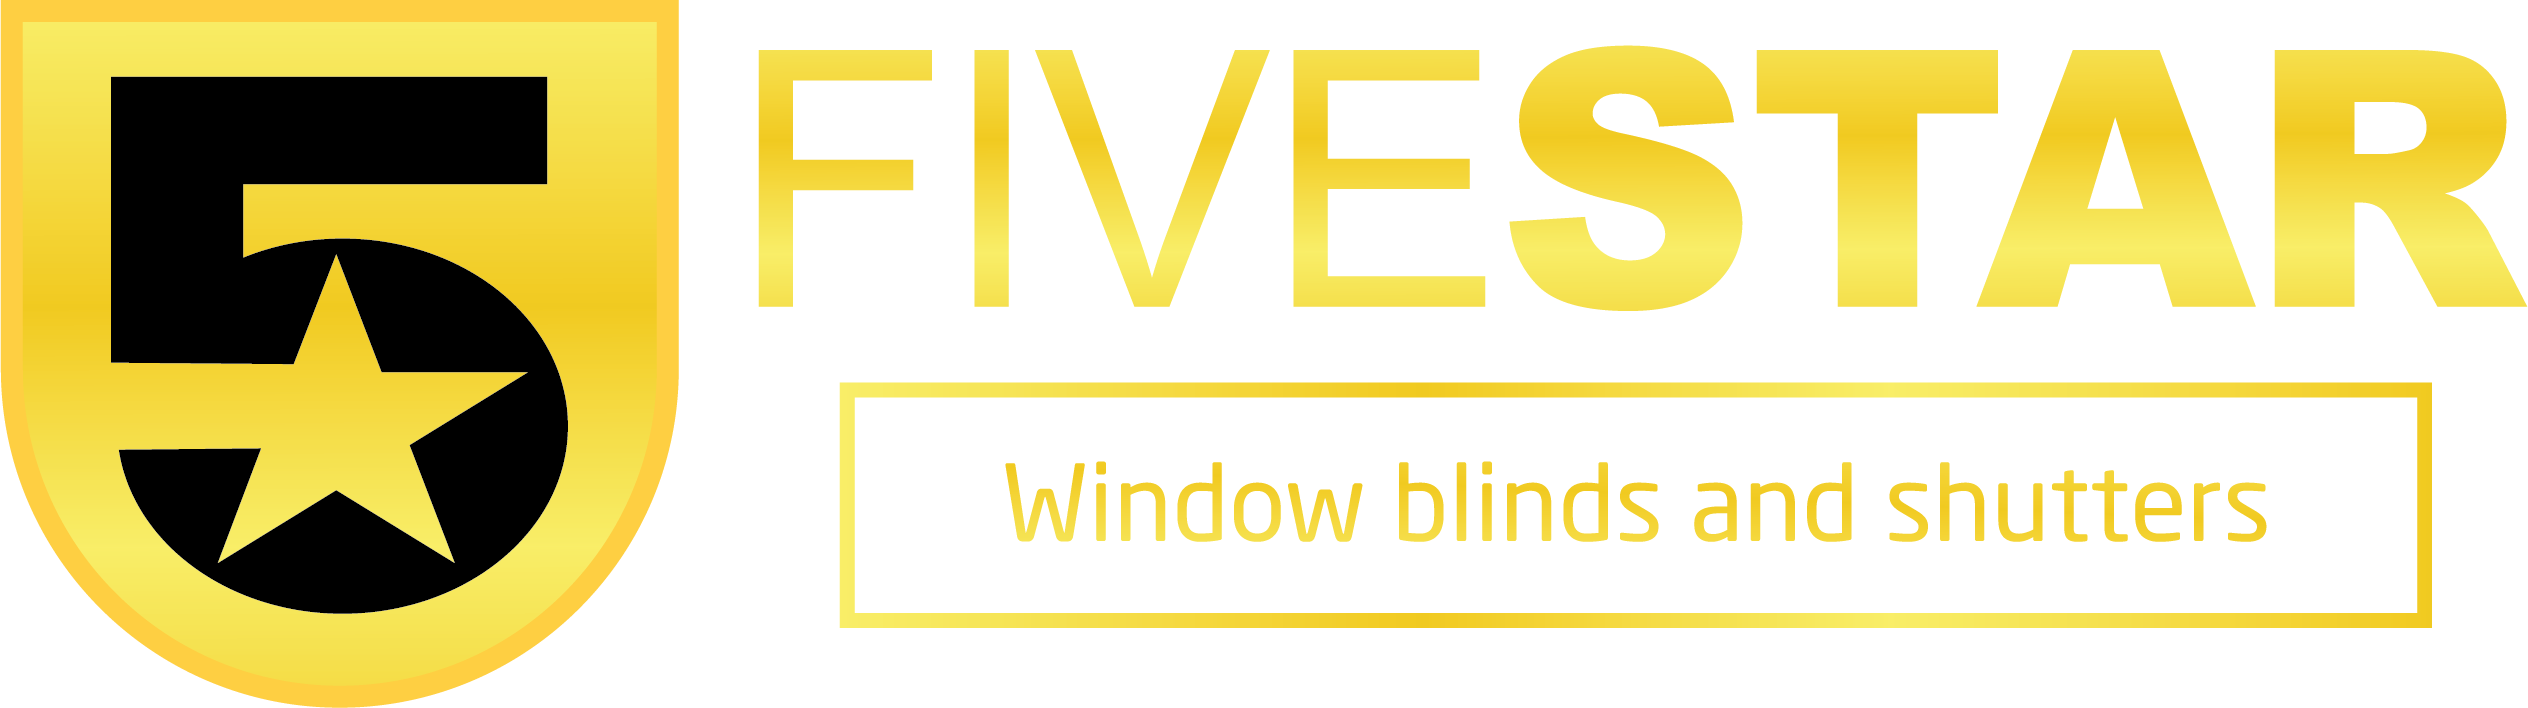 Five Star Blinds